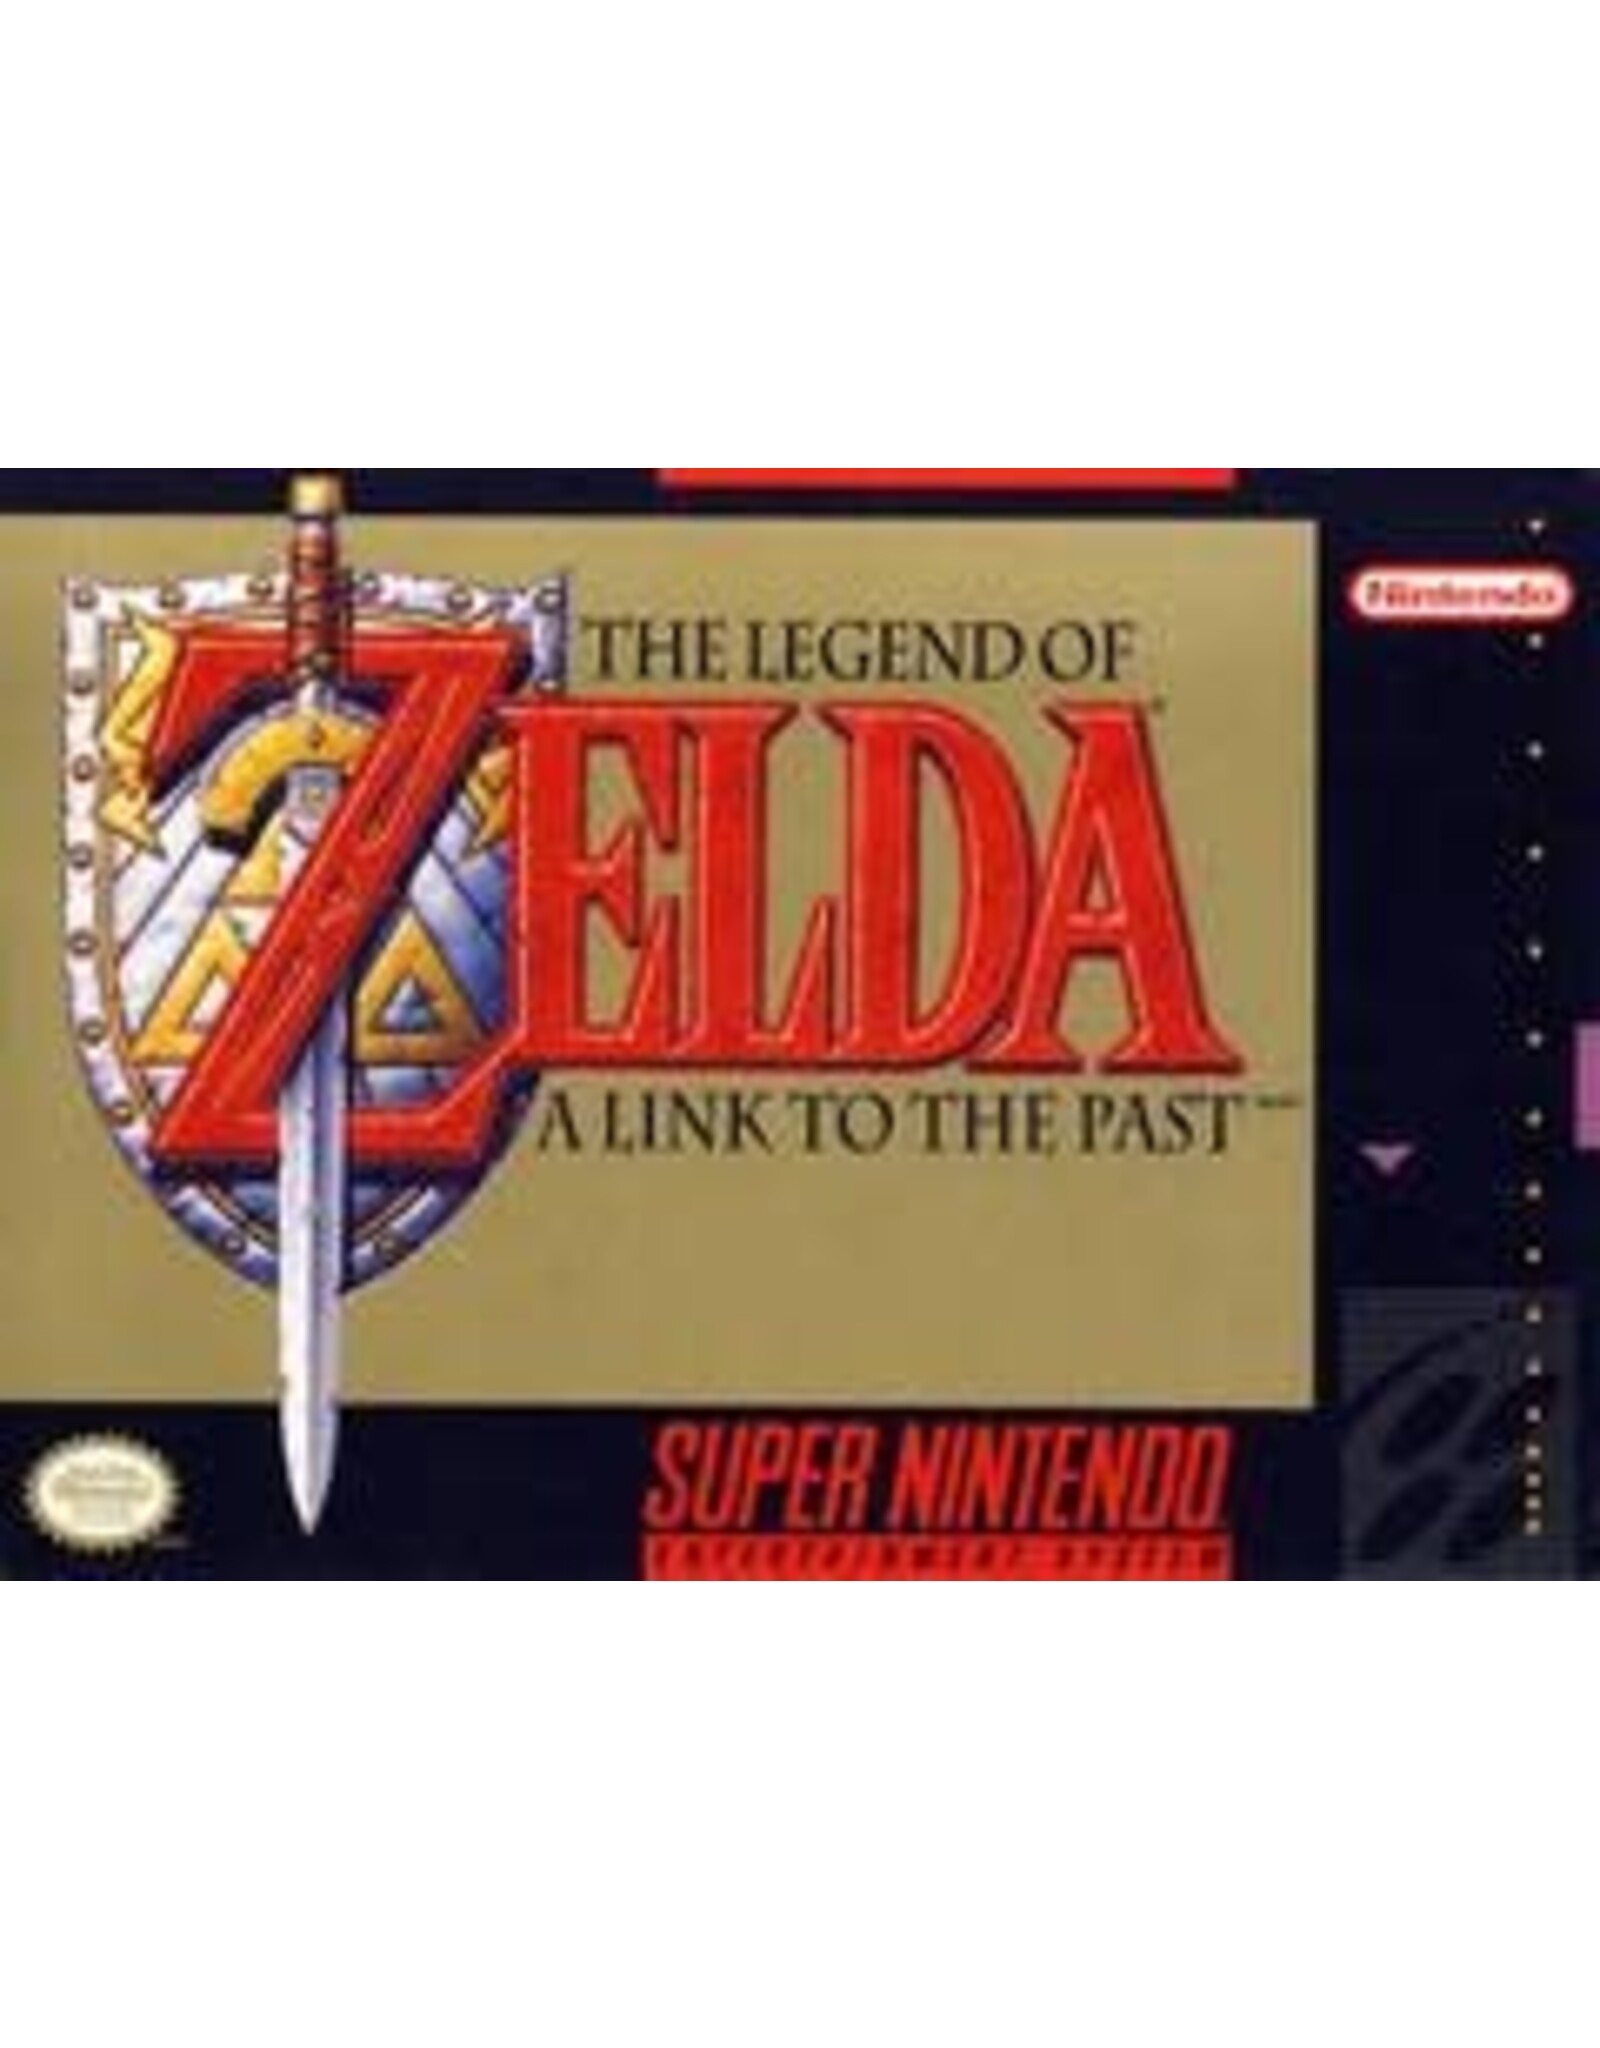 Super Nintendo Legend of Zelda A Link to the Past with Hint Book and Map (Used, Cosmetic Damage)